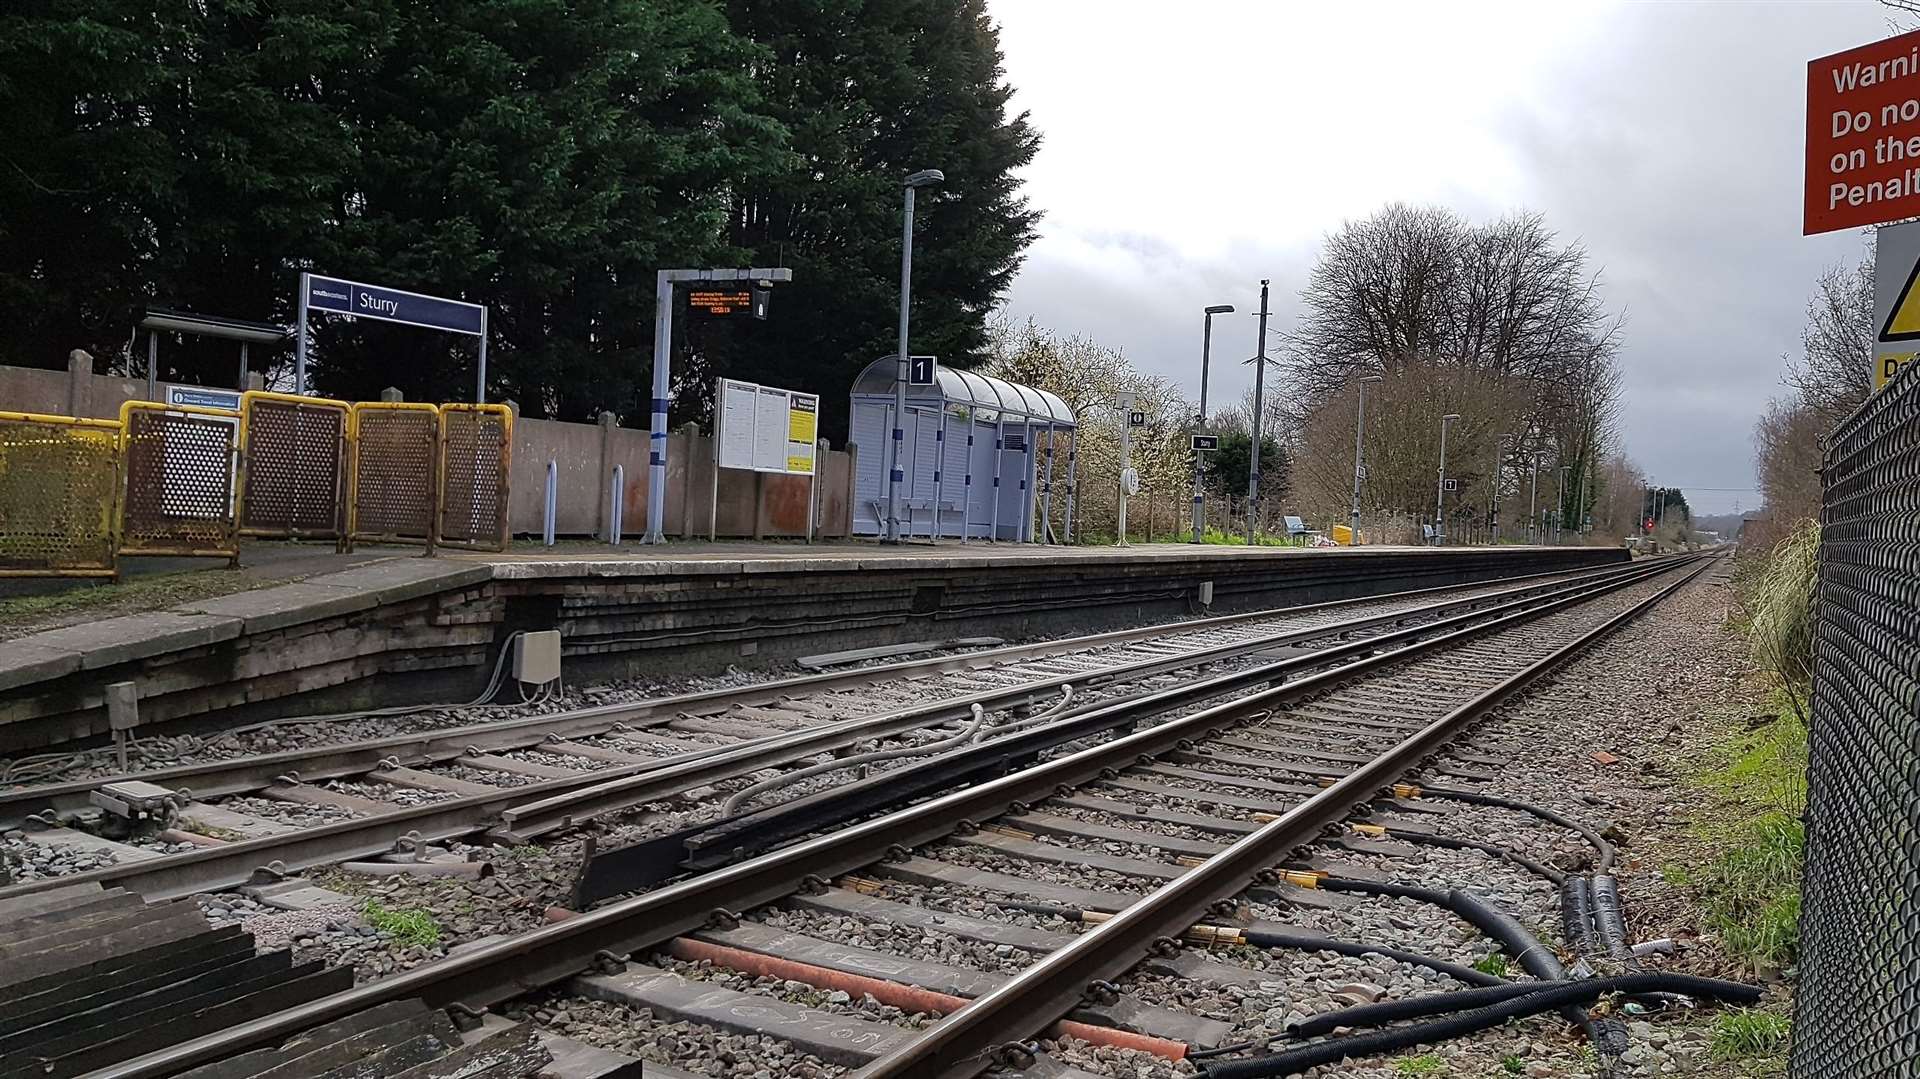 Trains were diverted after a trespasser was found on the line near Sturry railway station